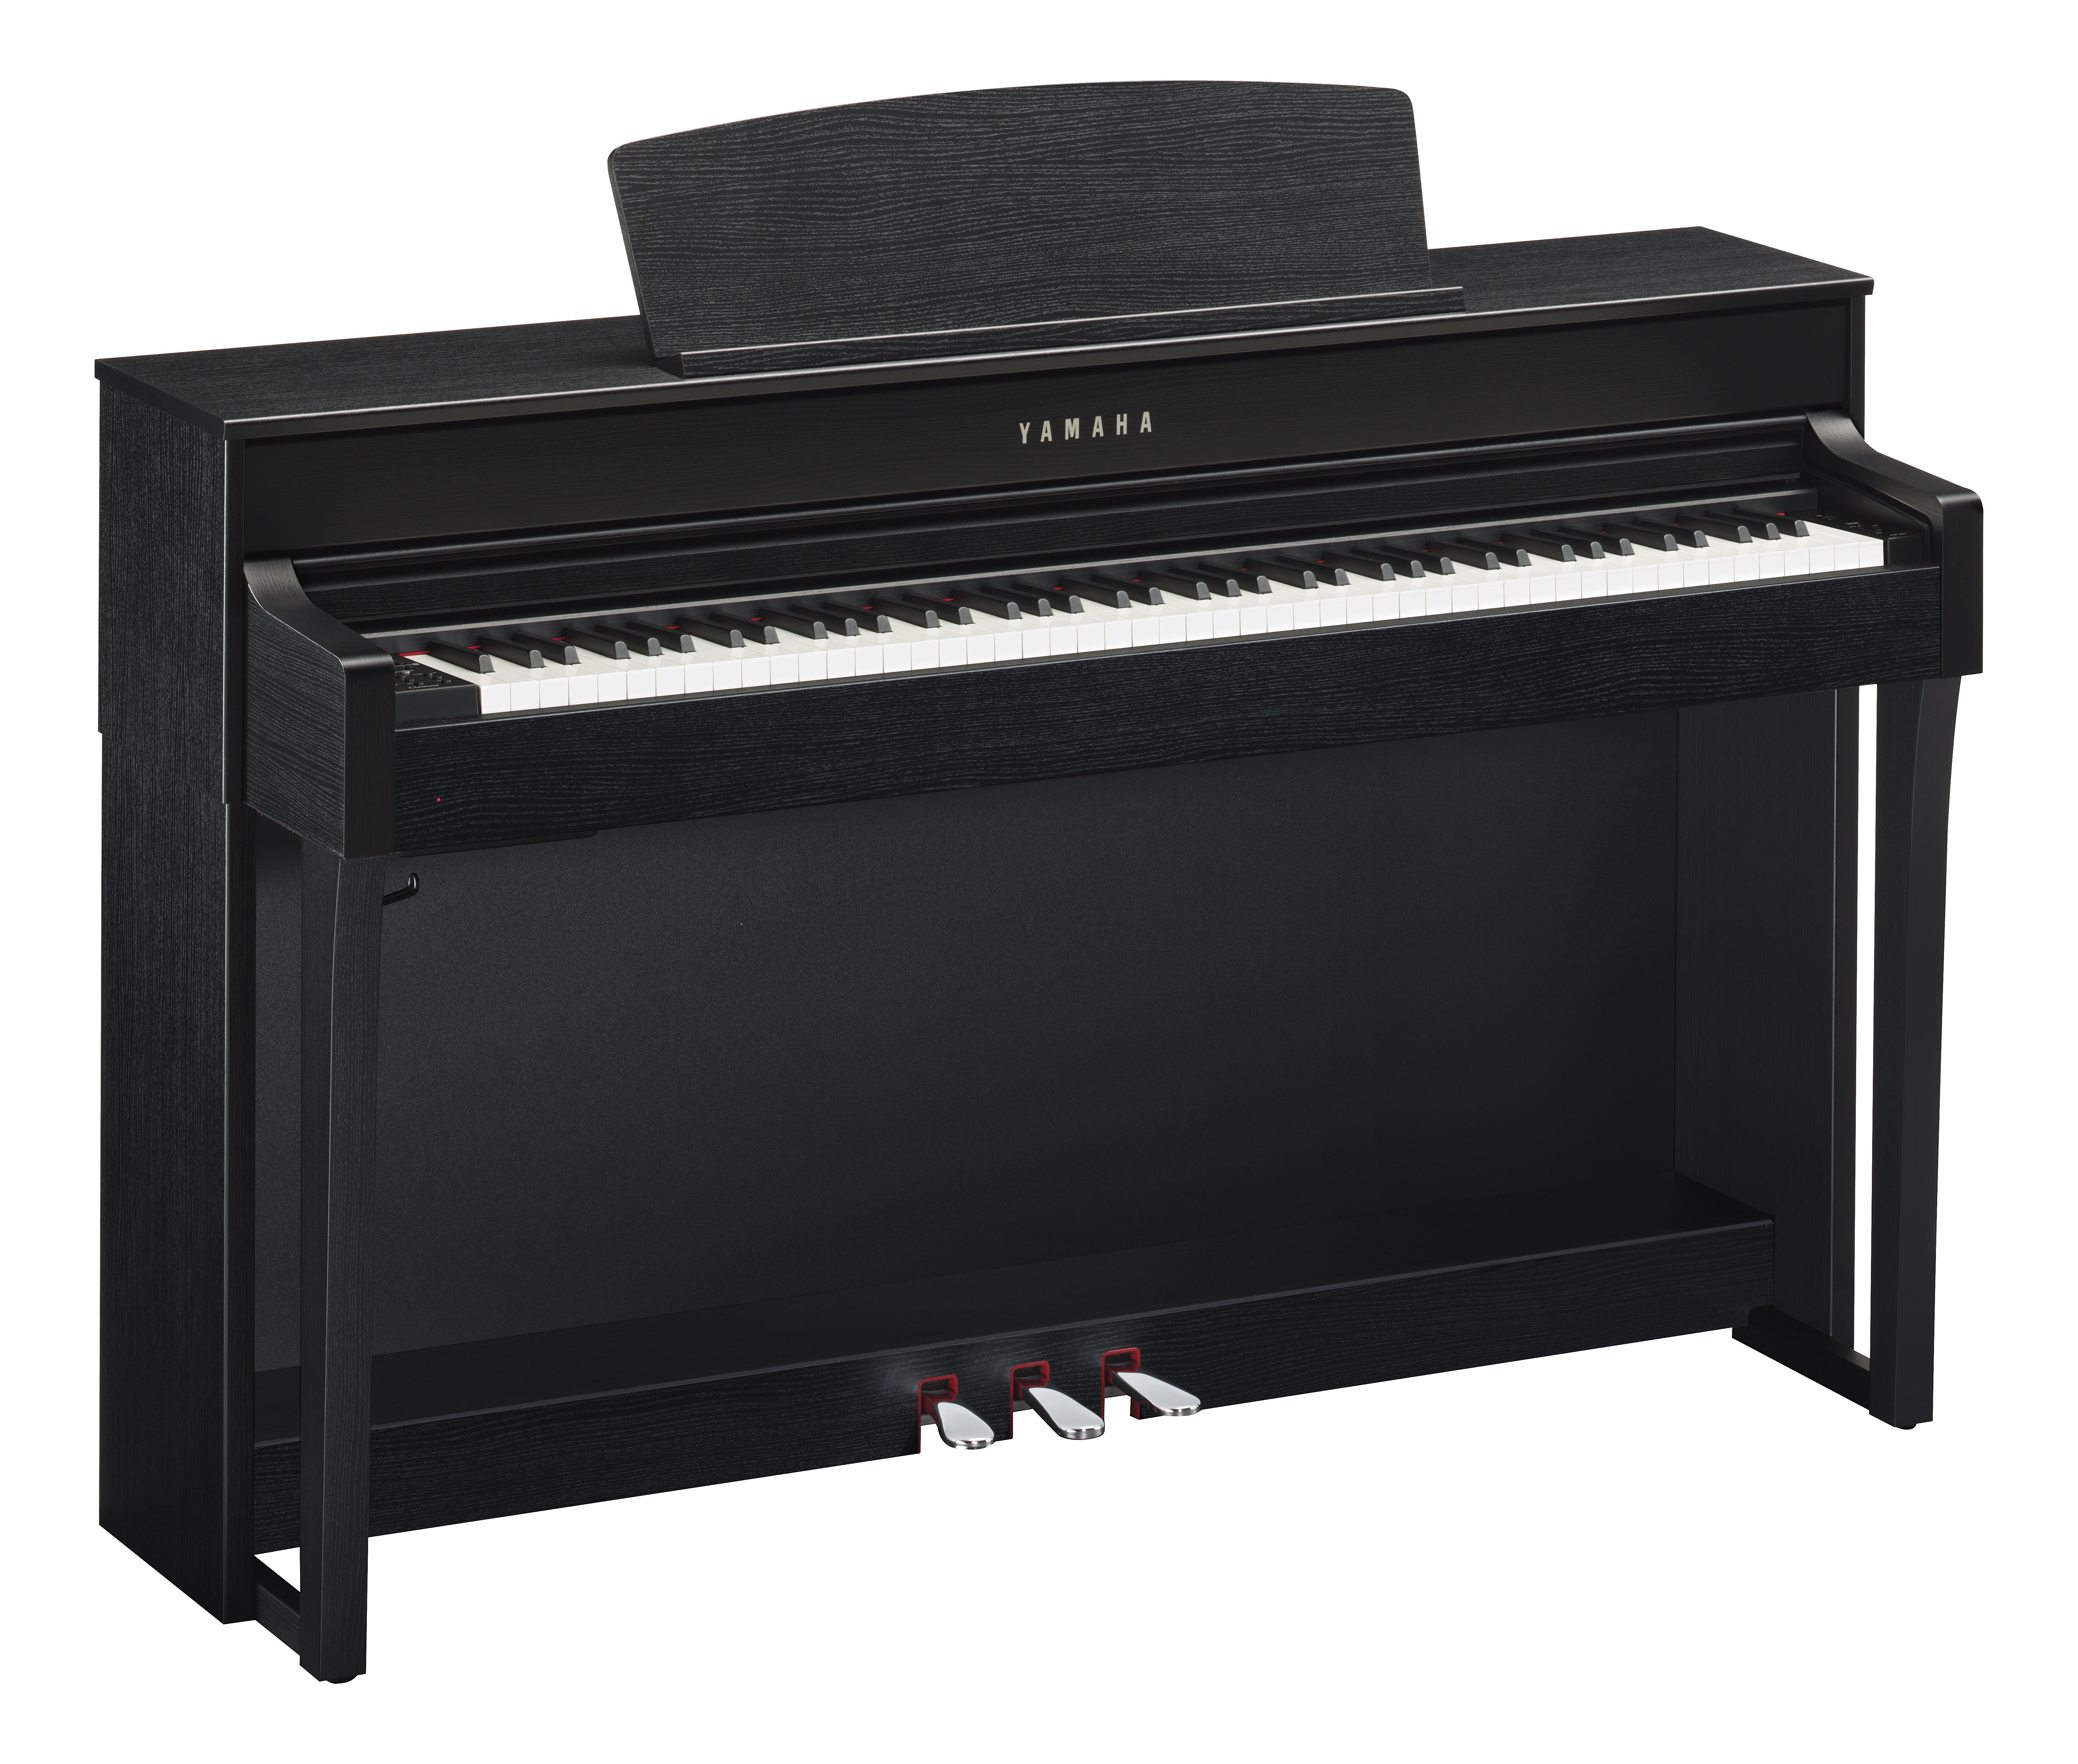 throw dust in eyes Penetrate Precondition CLP-645 - More Features - Clavinova - Pianos - Musical Instruments -  Products - Yamaha USA